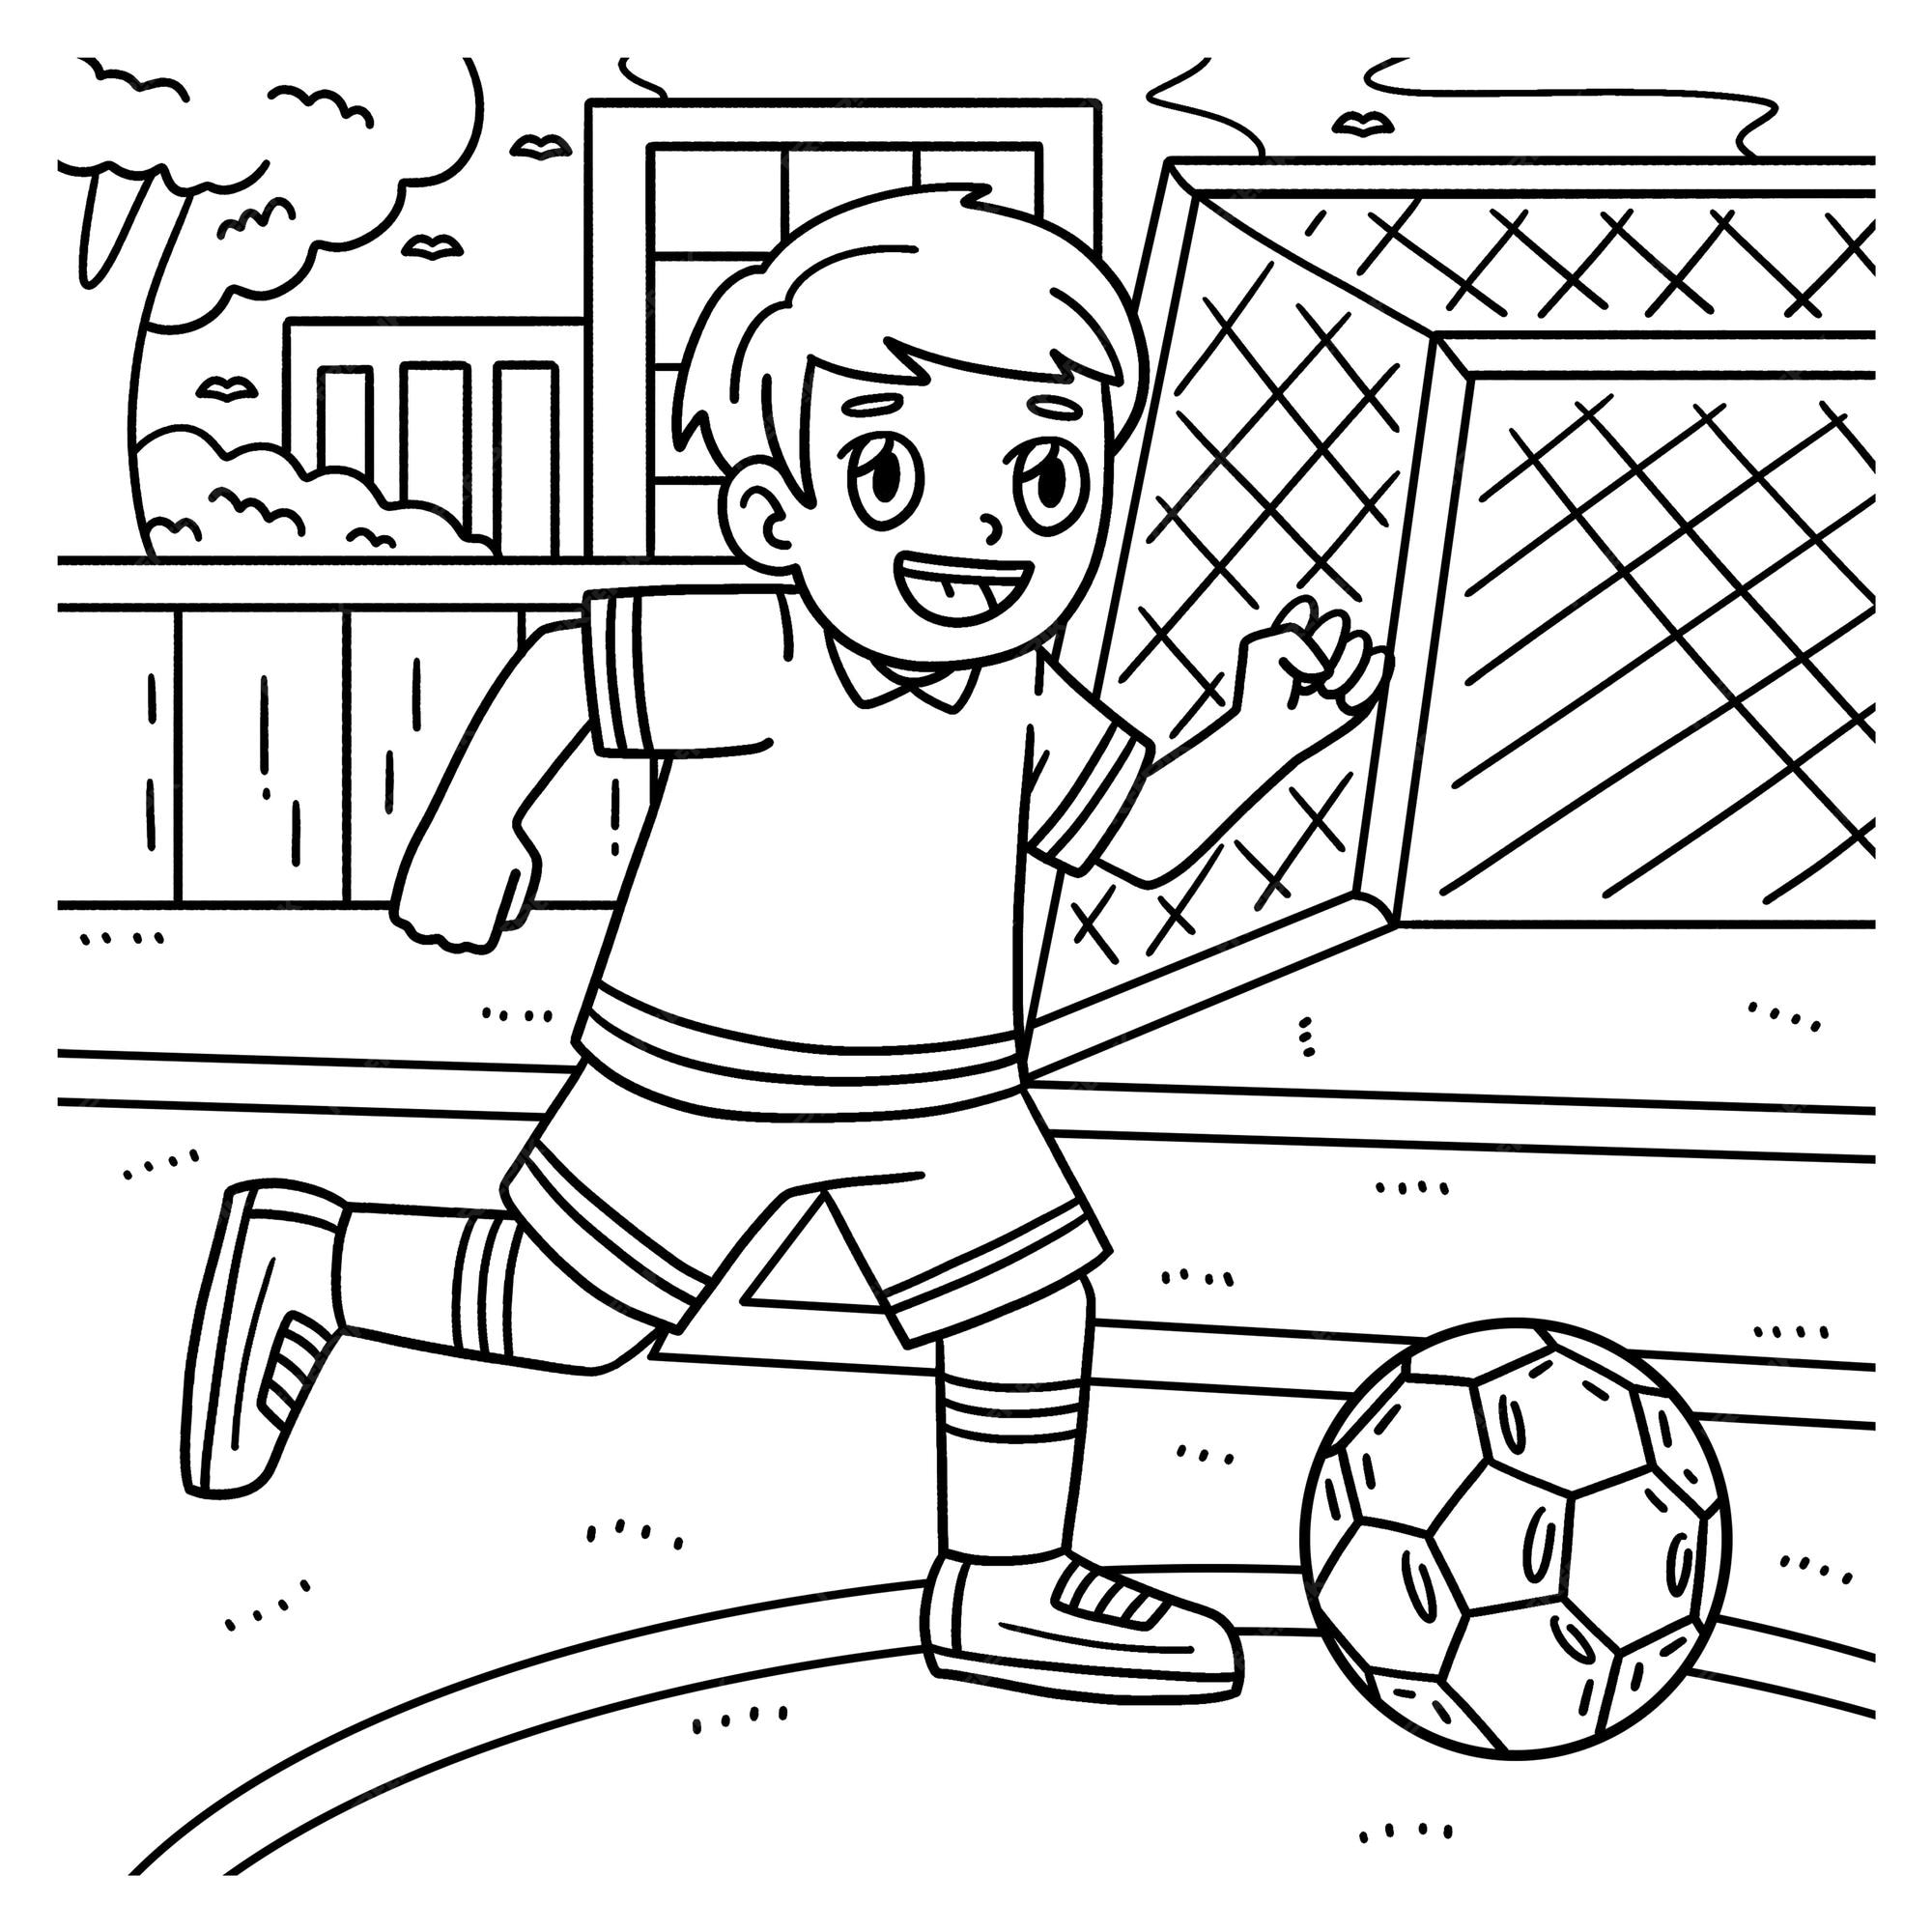 Premium vector a cute and funny coloring page of a boy chasing soccer ball provides hours of coloring fun for children to color this page is very easy suitable for little